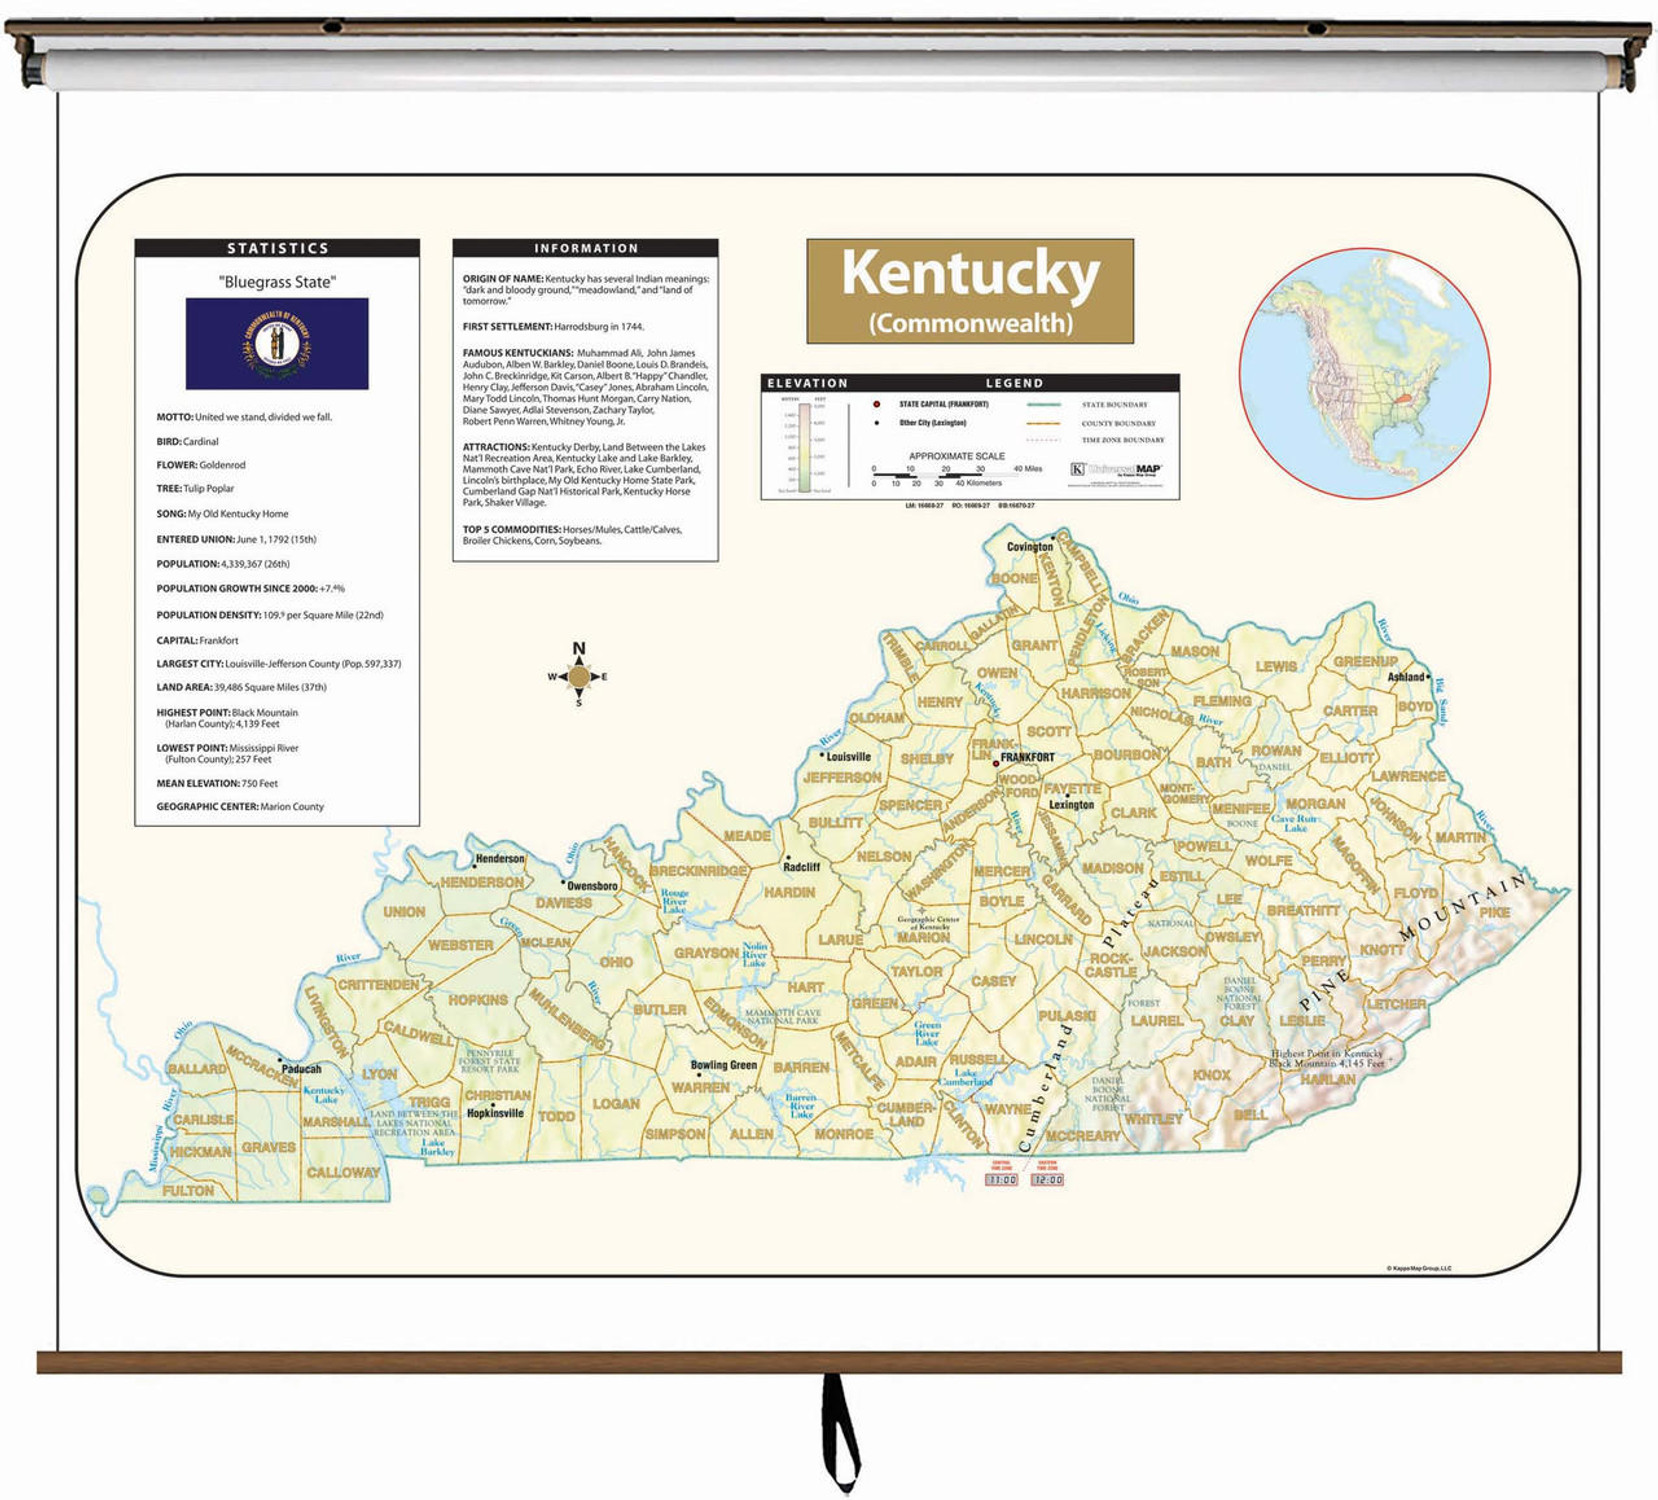 Kentucky Large Shaded Relief Map on Spring Roller from Kappa Maps, image 1, World Maps Online